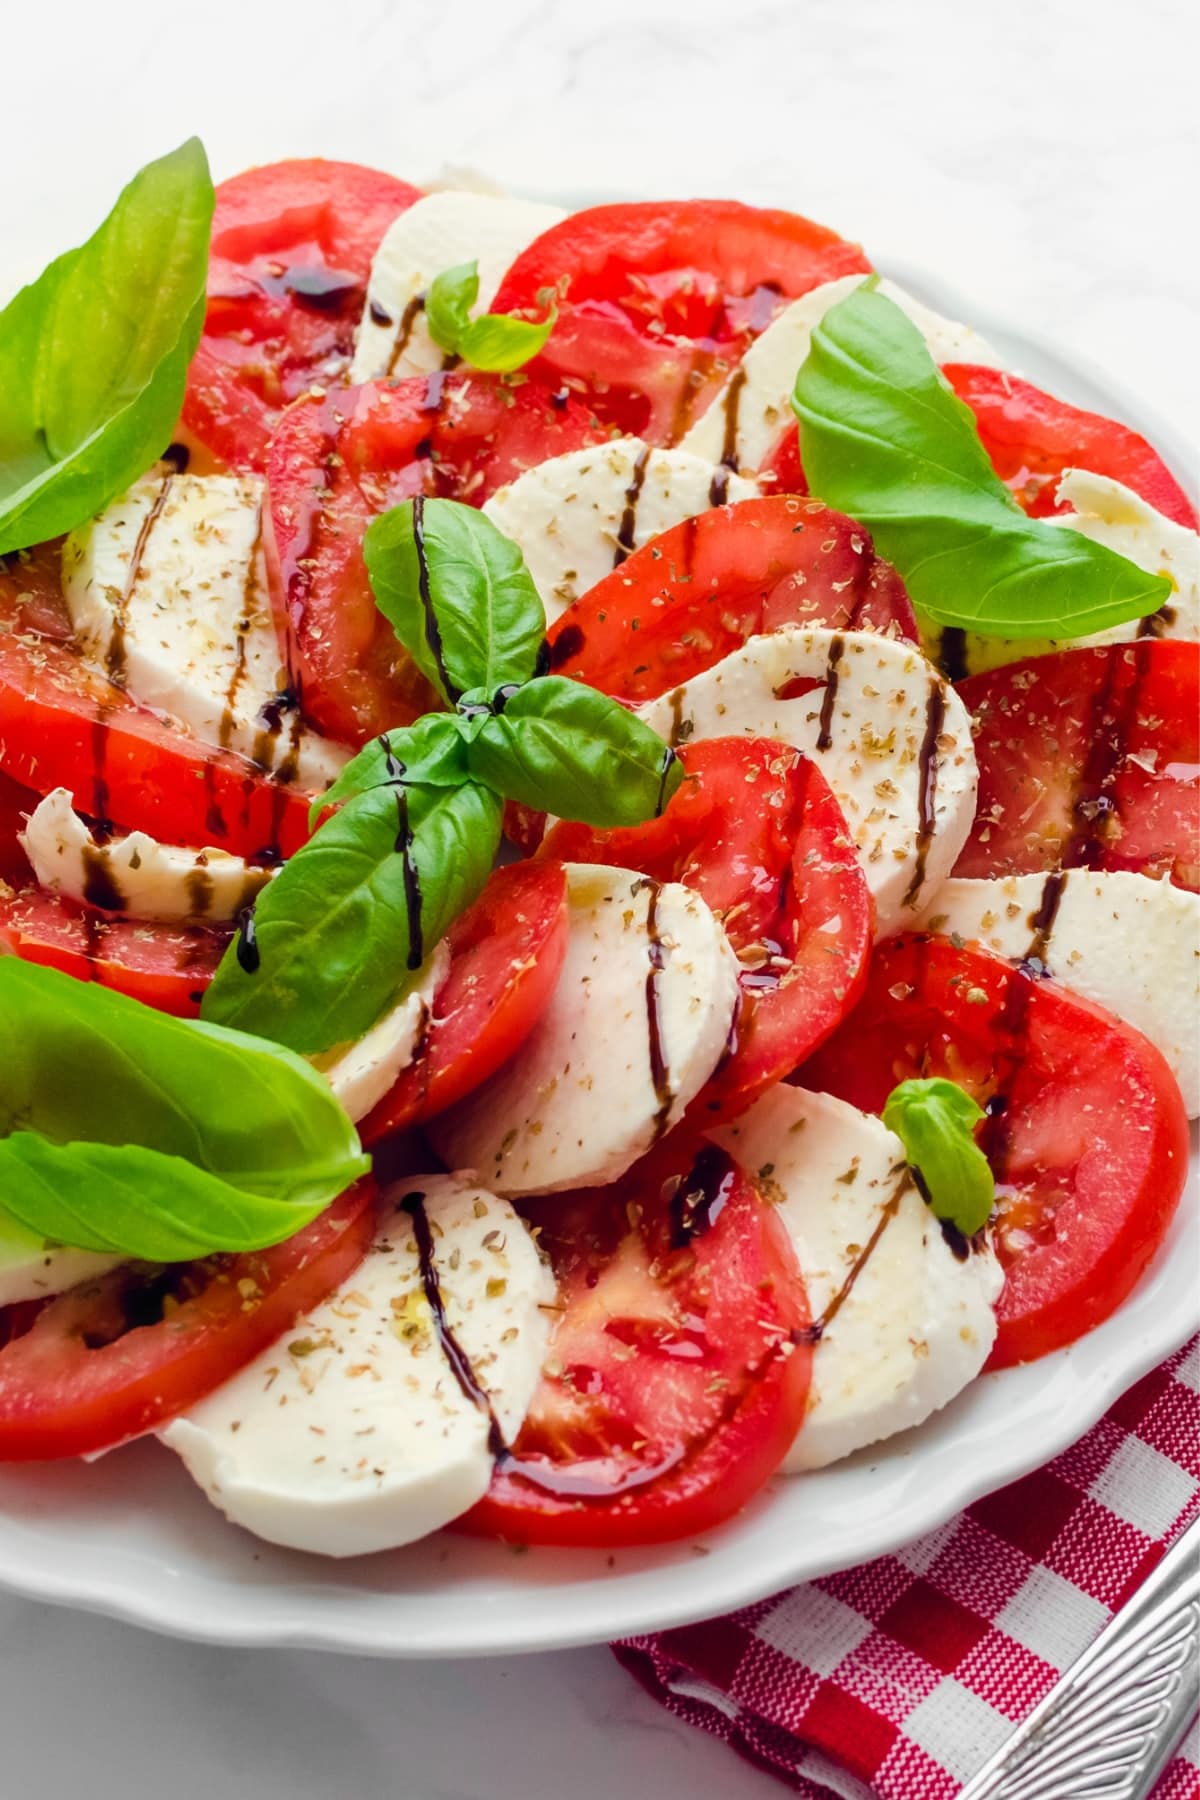 Caprese salad made with sliced tomatoes. mozzarella cheese and basil leaves drizzled with balsamic dressing and olive oil.